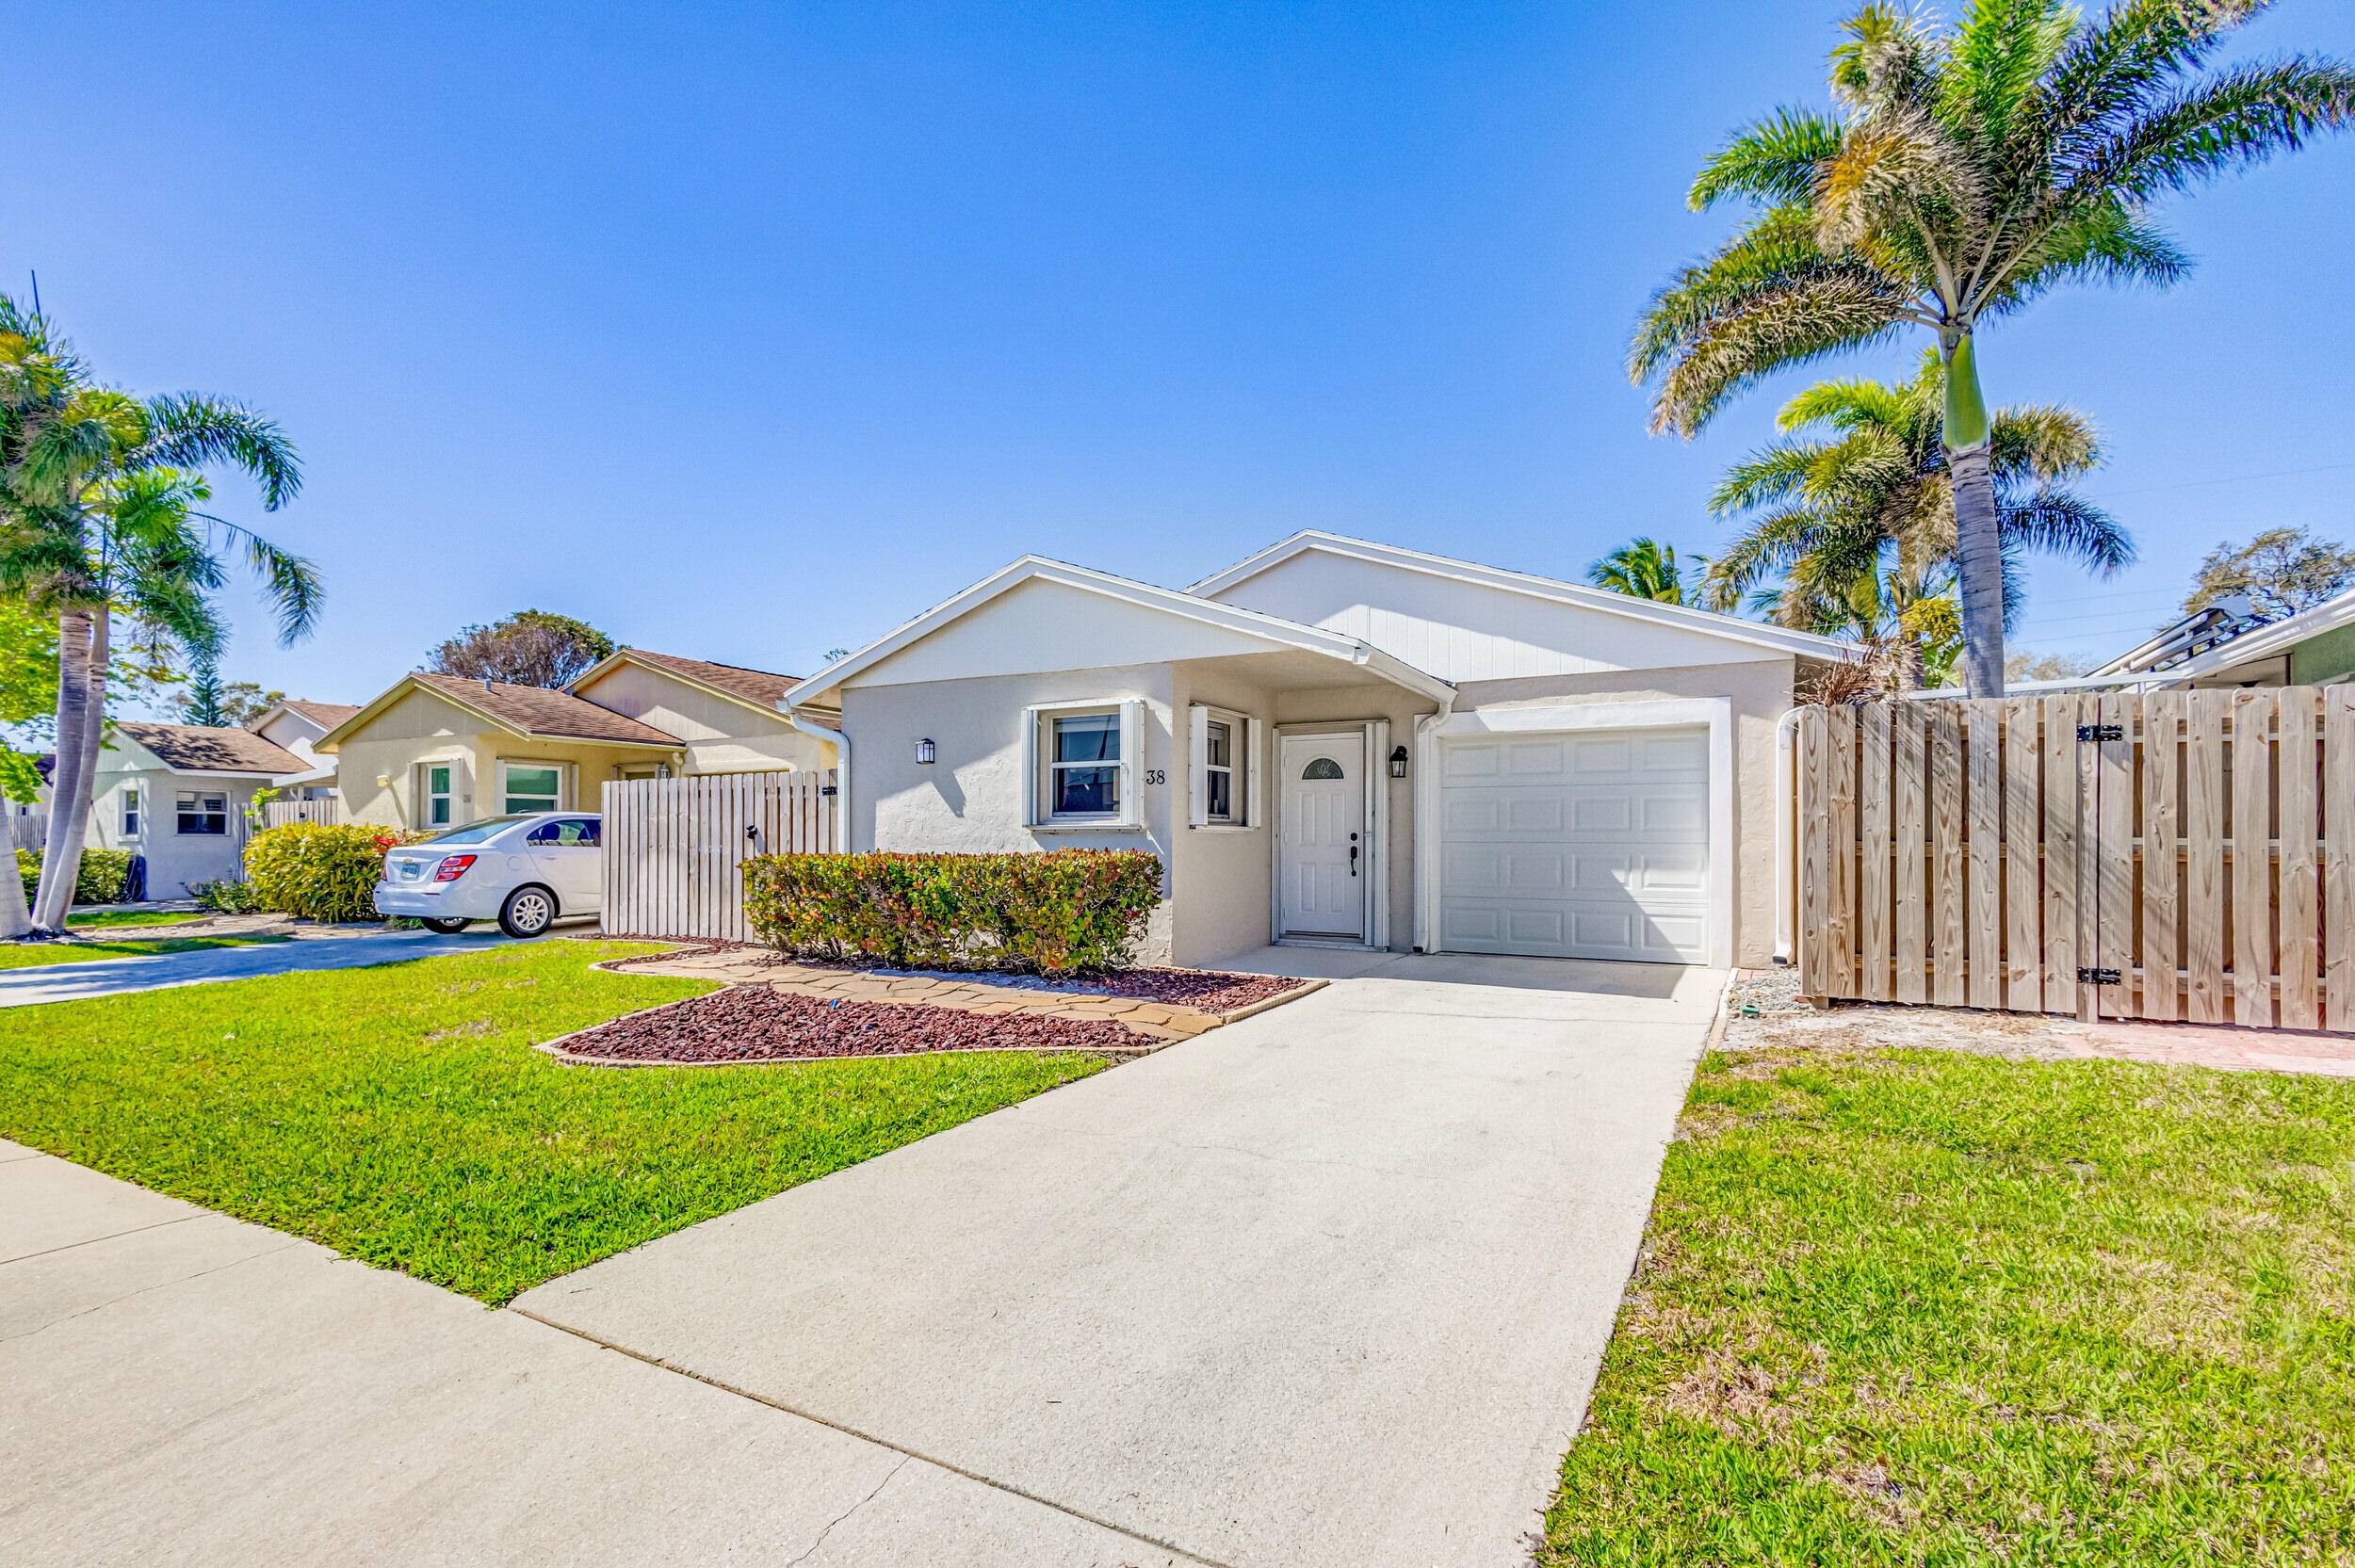 Discover this charming 3B 2B home nestled in quiet and quaint Village of Tequesta with a Jupiter address and is conveniently located near the beaches, shops, restaurants, and business district.